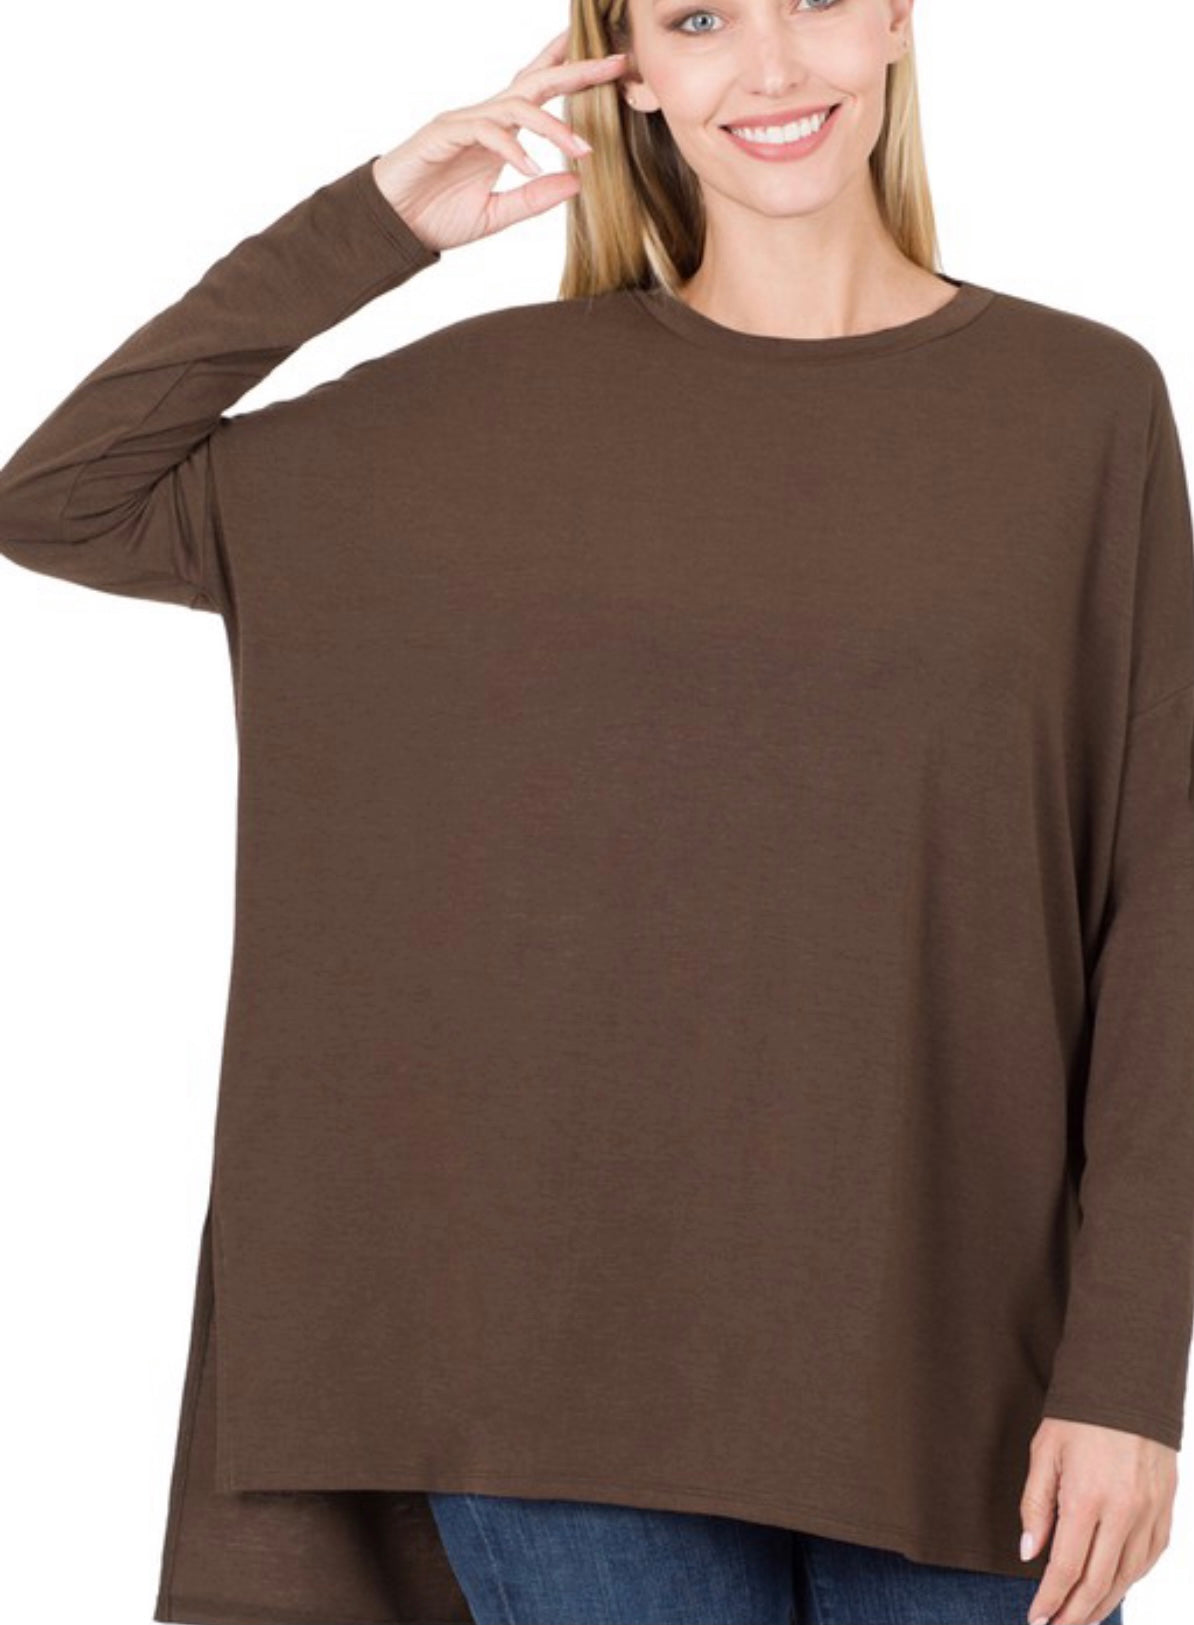 LONG DOLMAN SLEEVE ROUND NECK BOXY FIT TOP WITH SIDE SLITS